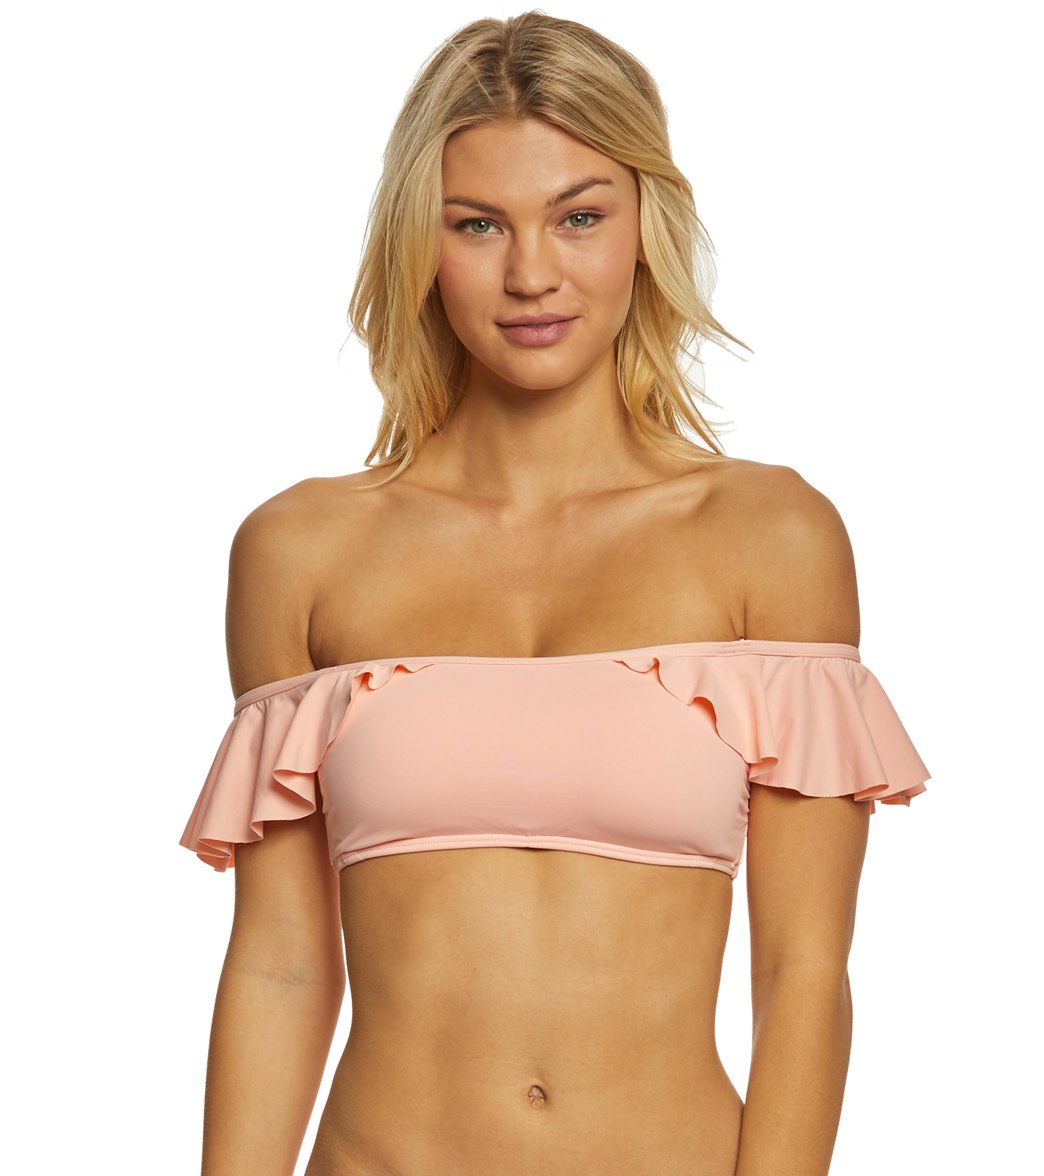 Vince Camuto Riviera Solid Off The Shoulder Bikini Top - Peony Large - Swimoutlet.com